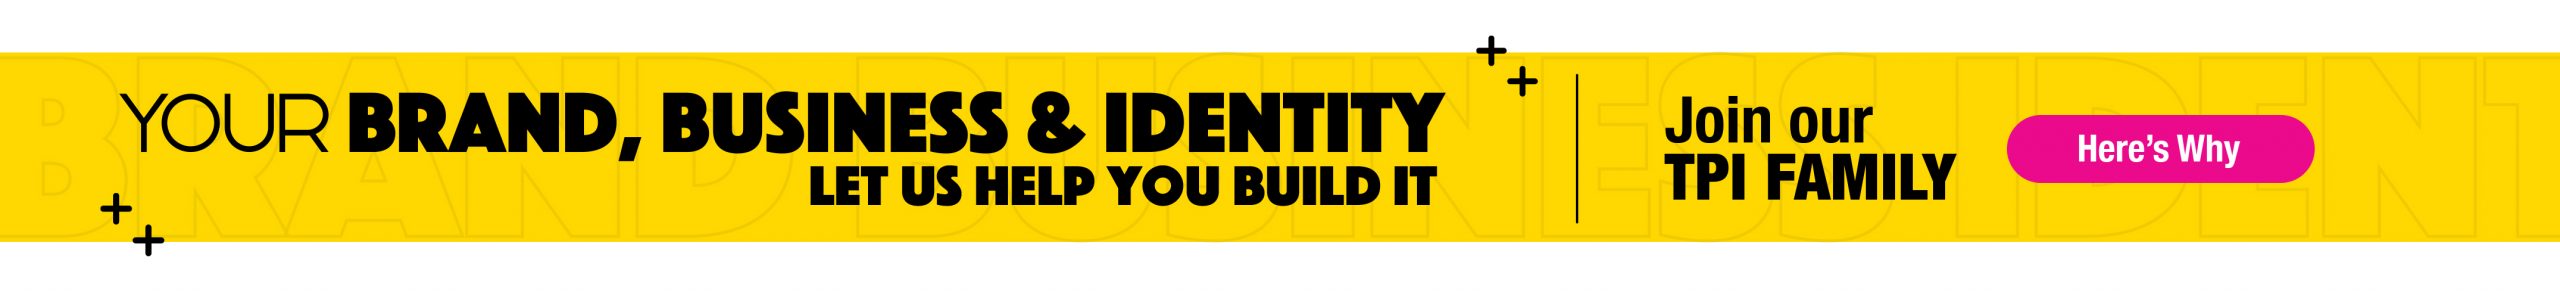 Your Brand, Business & Identity. Let us Help You Build it. Join Our TPI Family